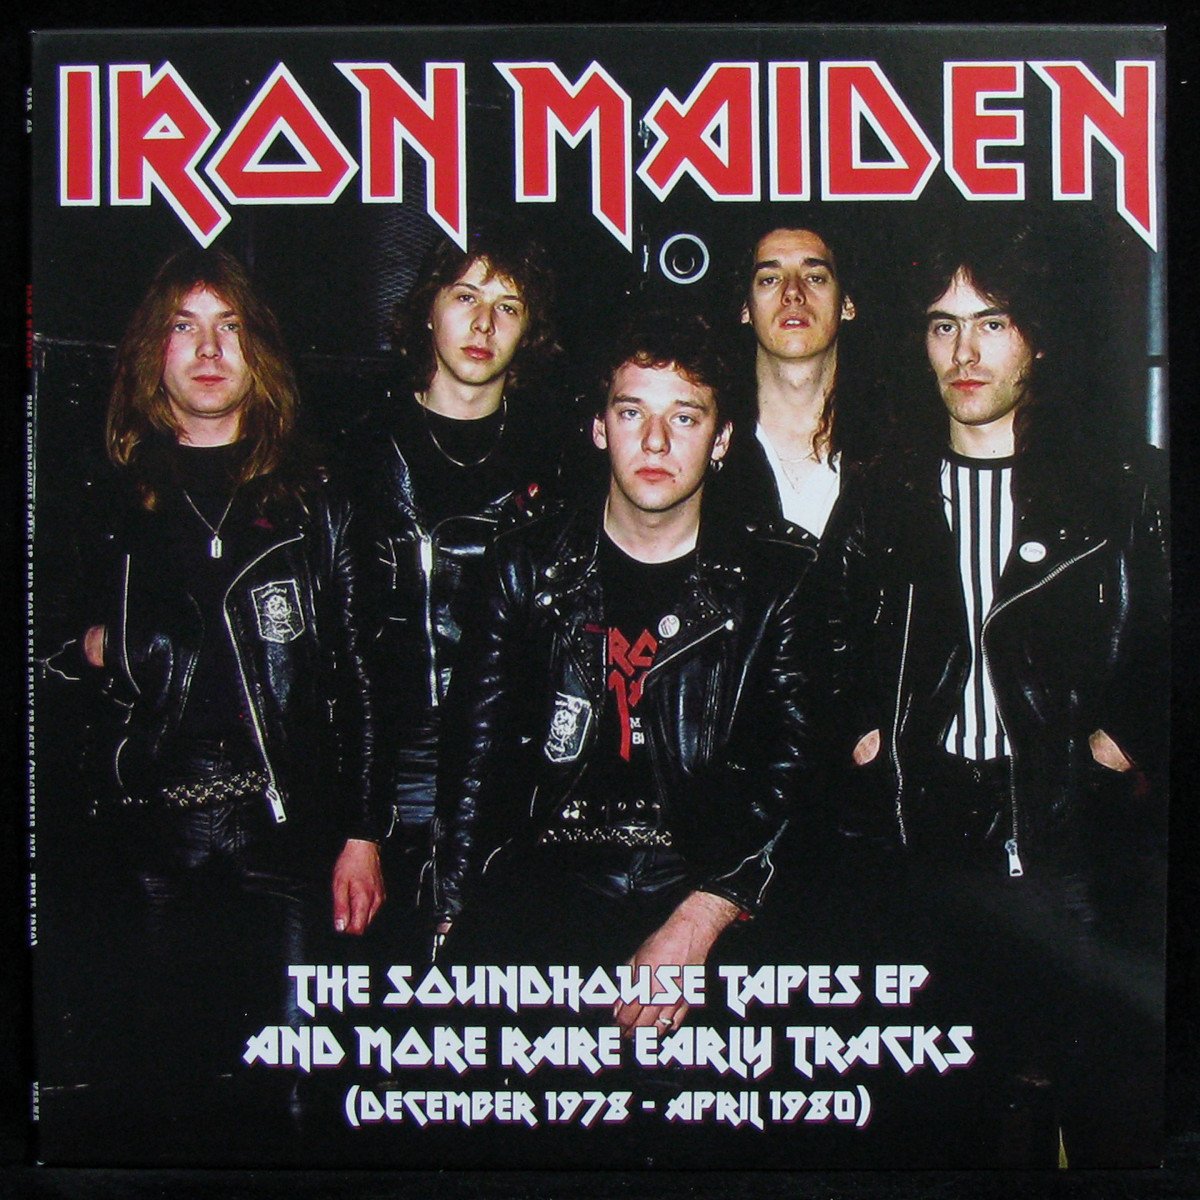 LP Iron Maiden — Soundhouse Tapes EP And More Rare Early Tracks (December 1978 - April 1980) фото